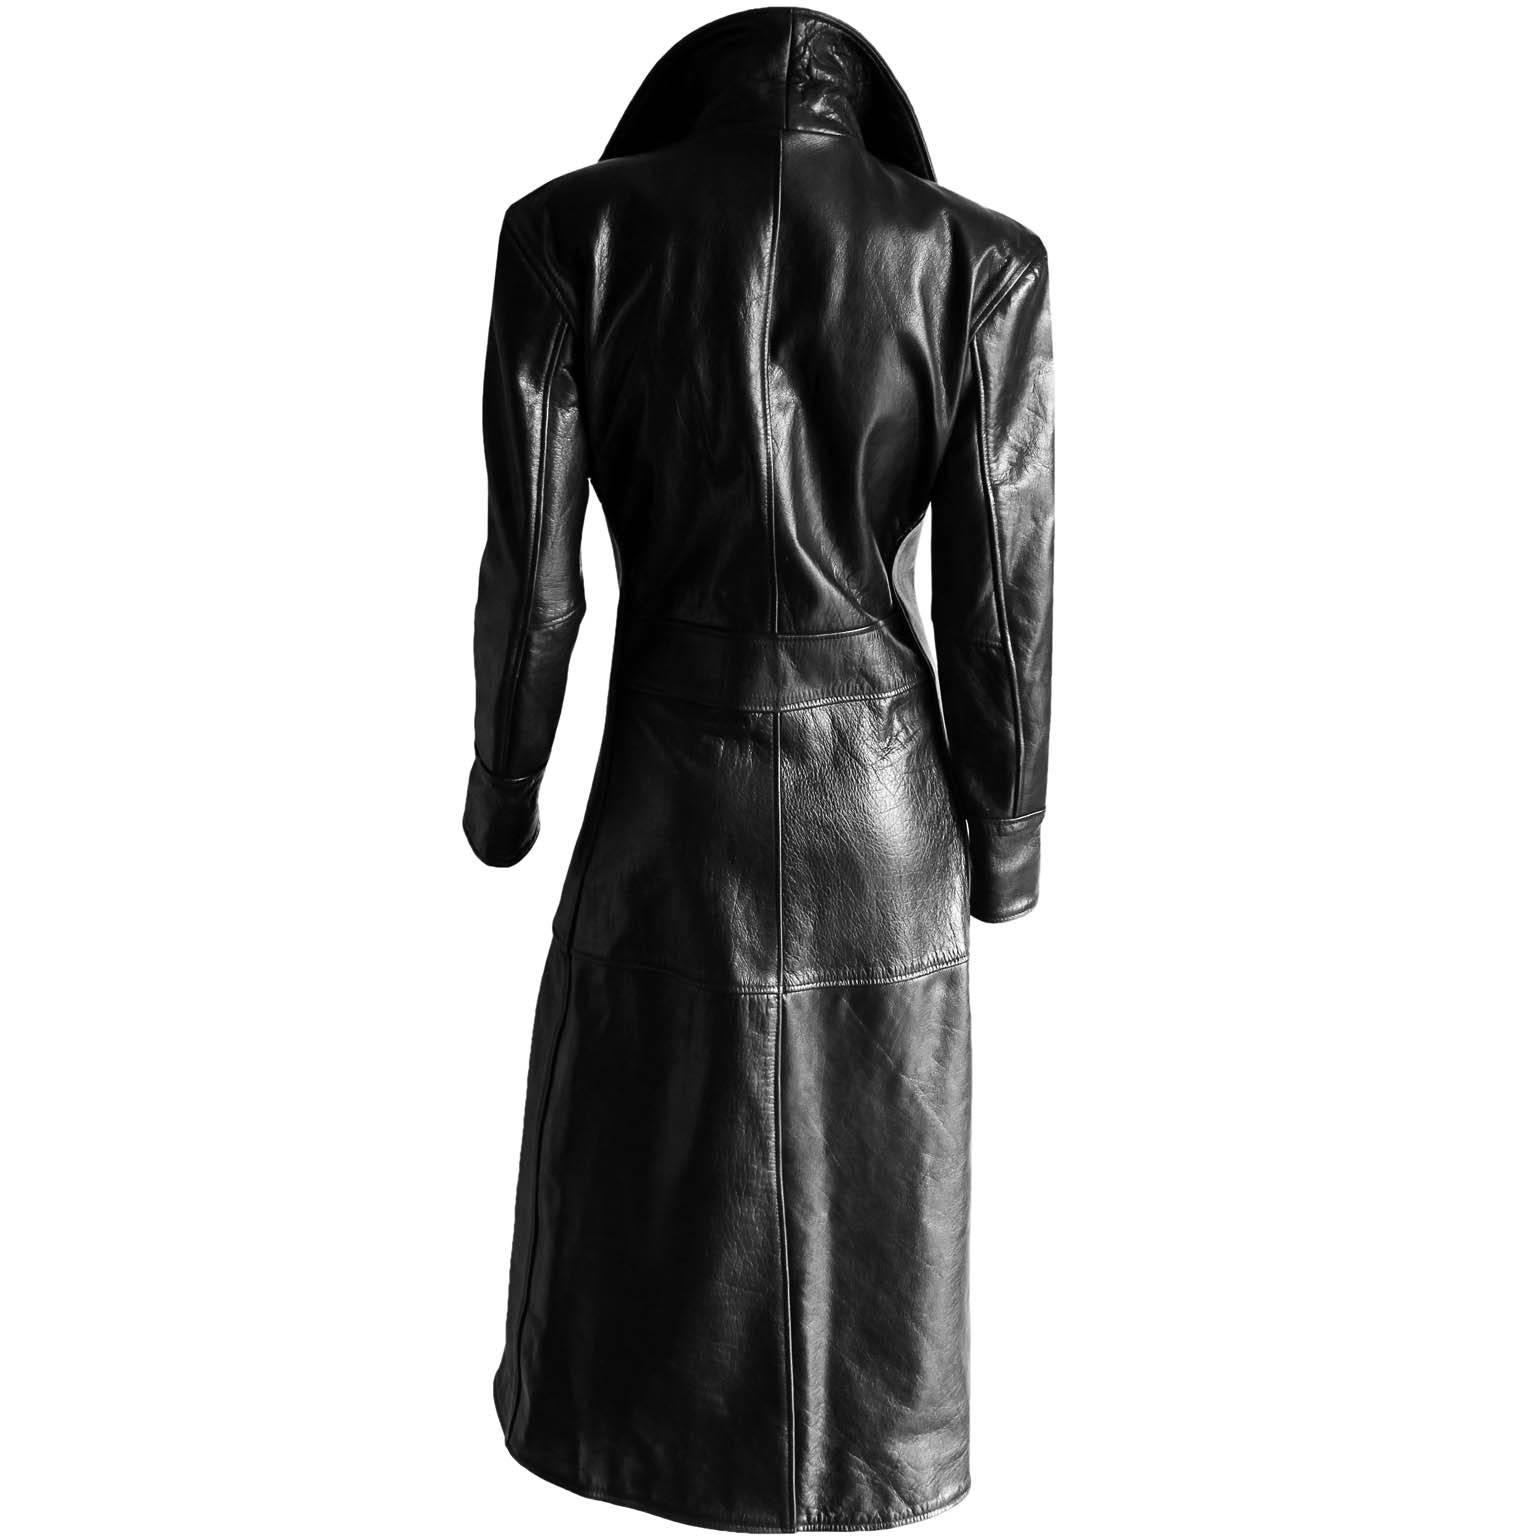 The Most Incredibly Rare & Iconic Black Leather Coat From Tom Ford's Fall Winter 1996 Collection For Gucci!

We've been international collectors of Tom Ford for Gucci & YSL since 2005, buying primarily for ourselves &  wholesaling to a